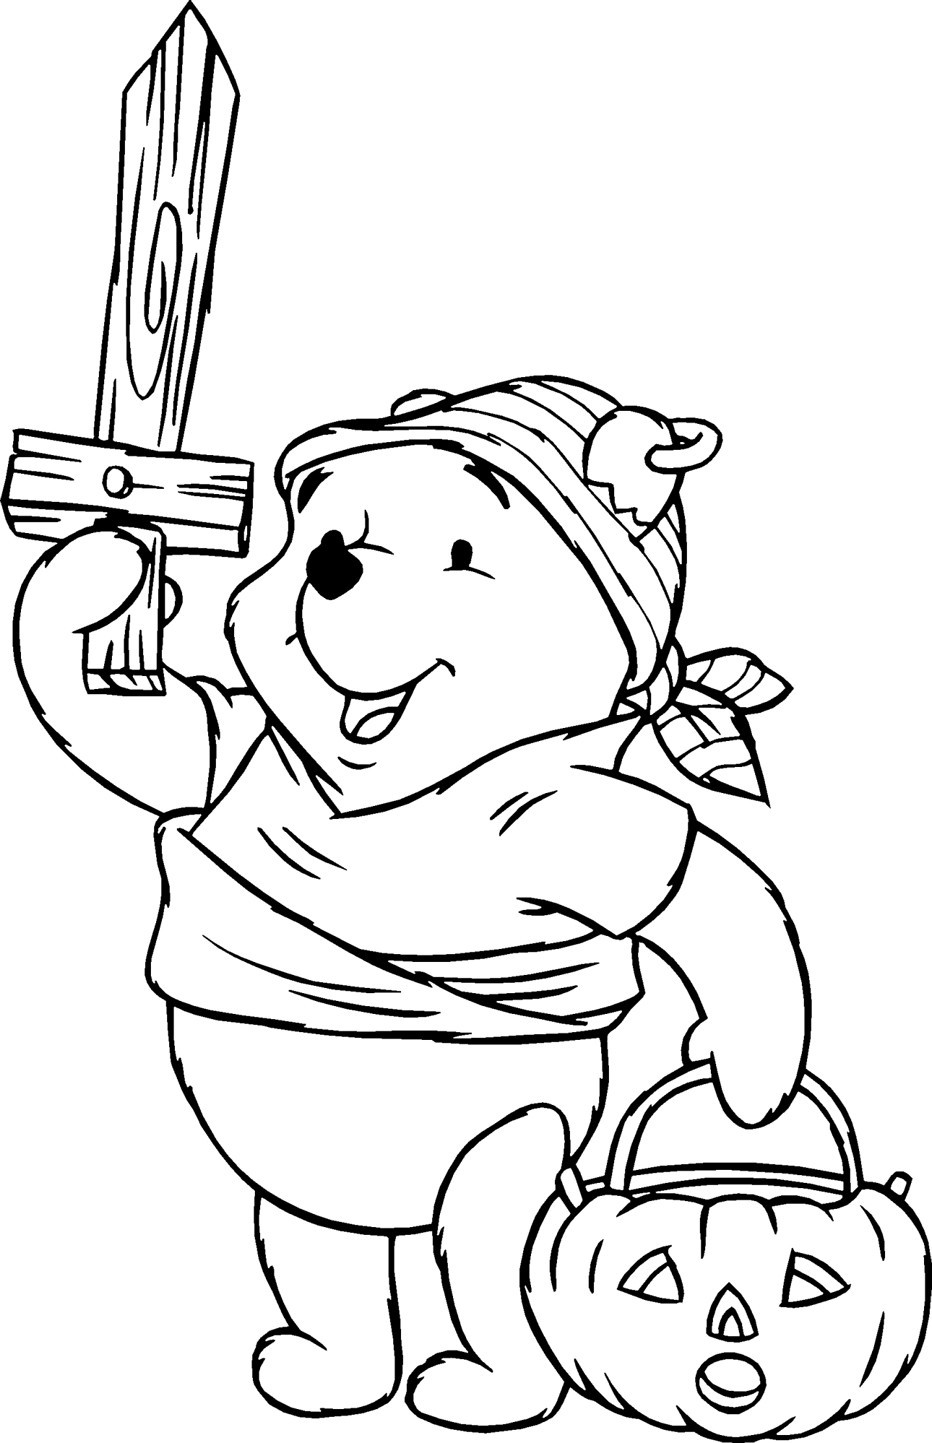 Free Coloring Sheets For Kids
 24 Free Printable Halloween Coloring Pages for Kids